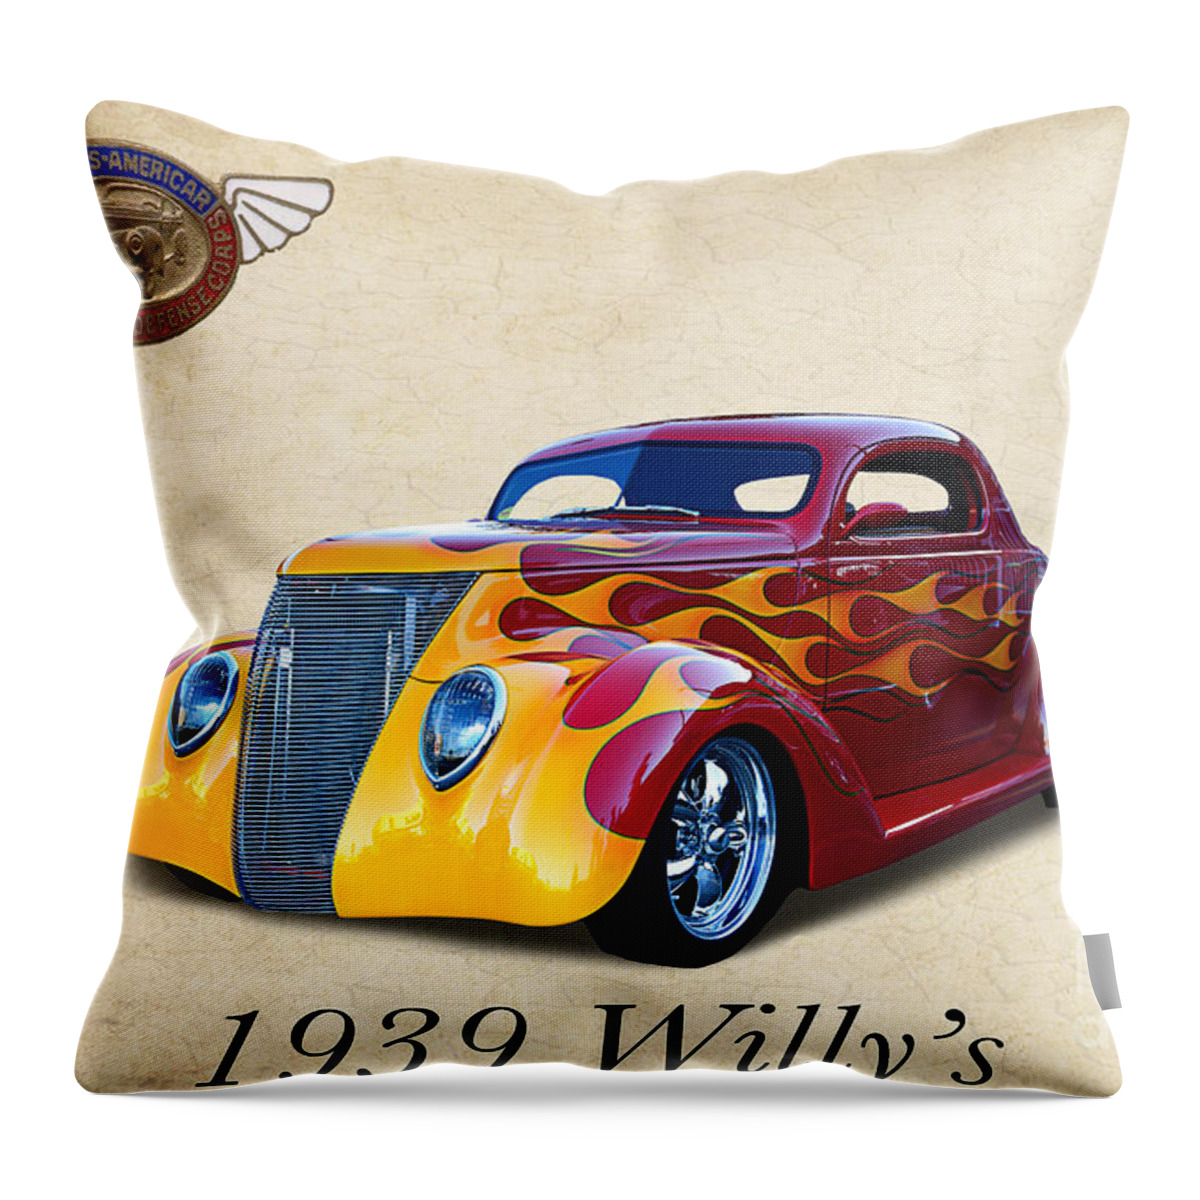 Auto Throw Pillow featuring the photograph 1939 Willy's by Jim Hatch